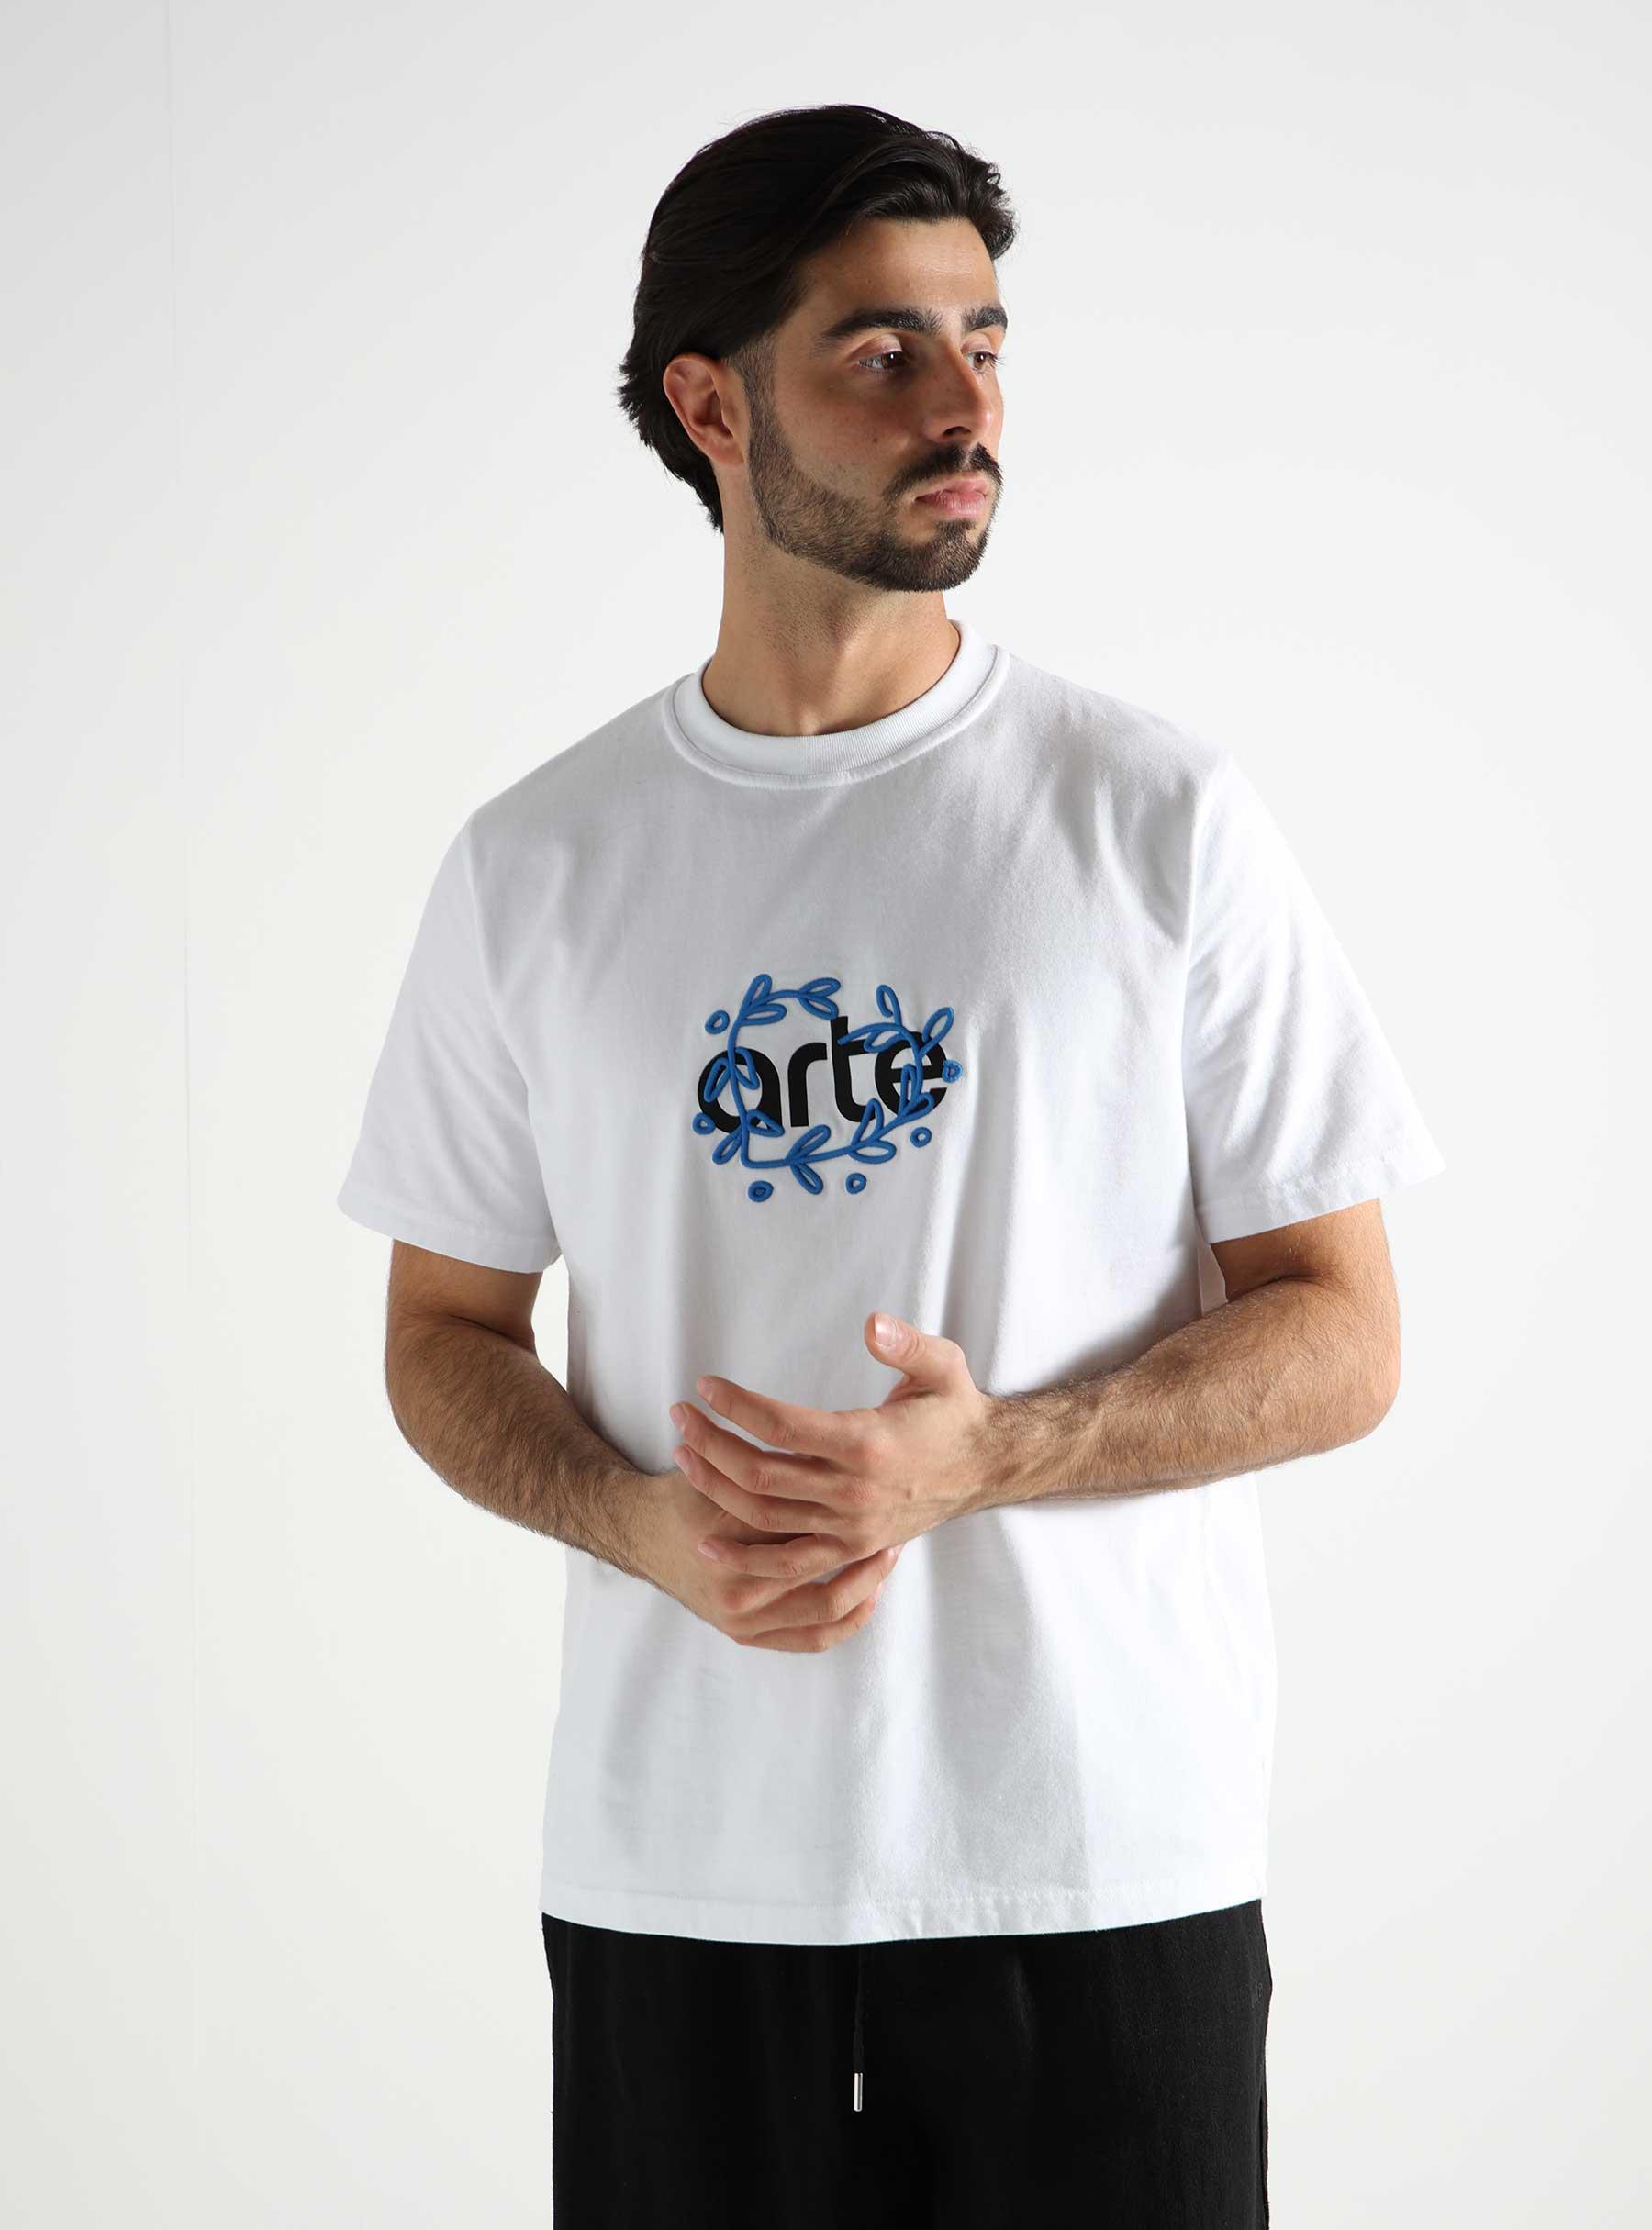 Teo Arte Front T-shirt White SS24-017T